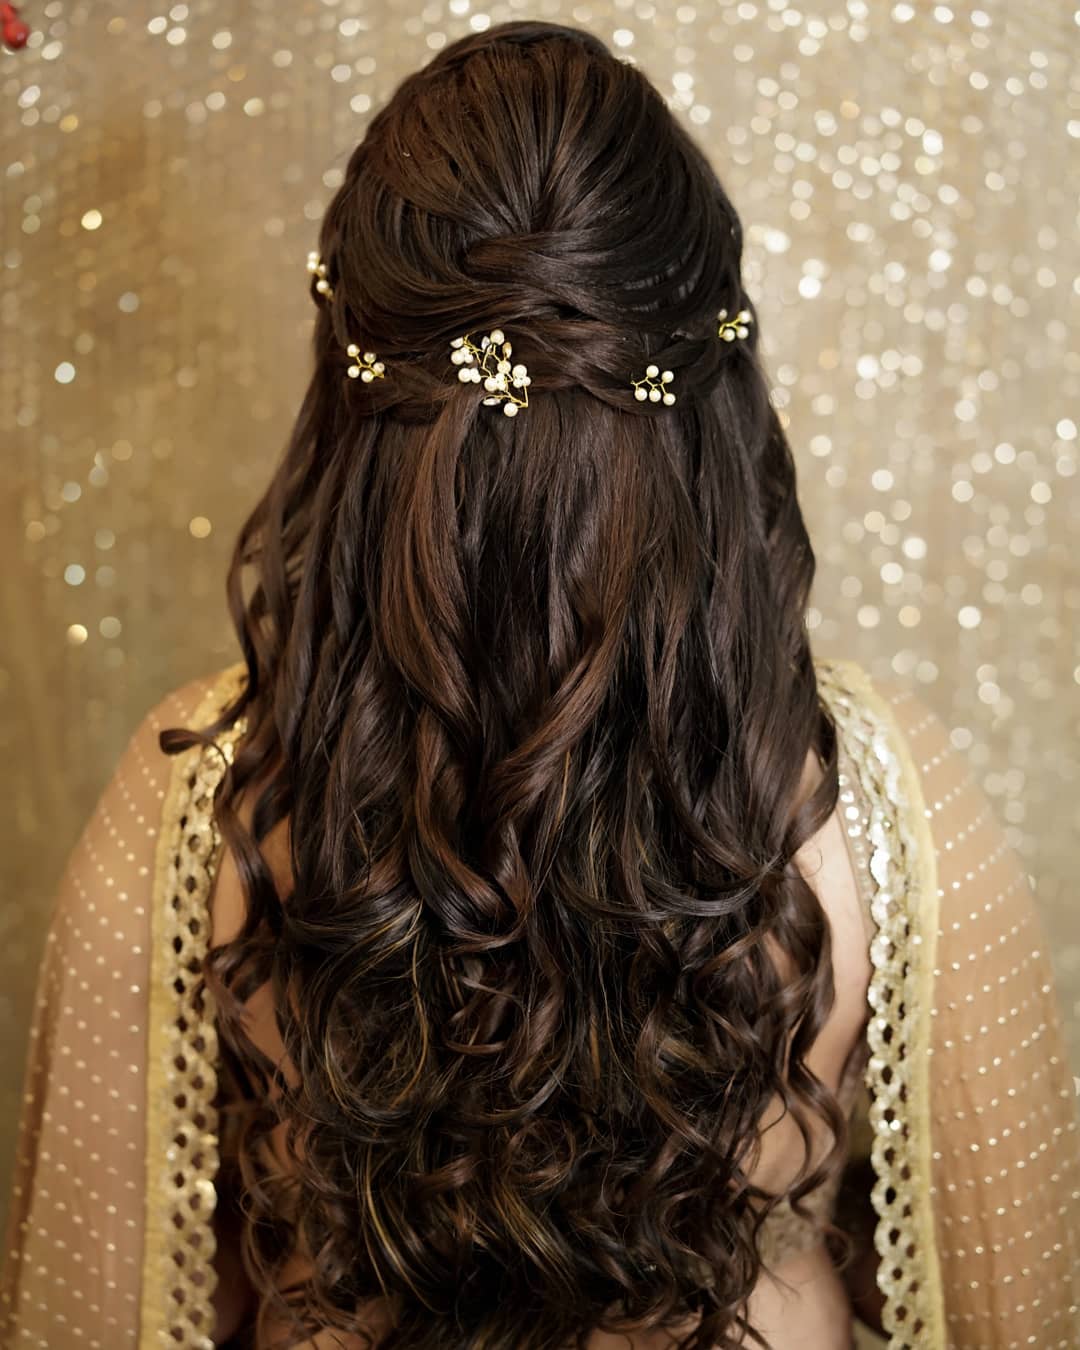 Best Bridal Hairstyles 2019 We Spotted On Real Brides!